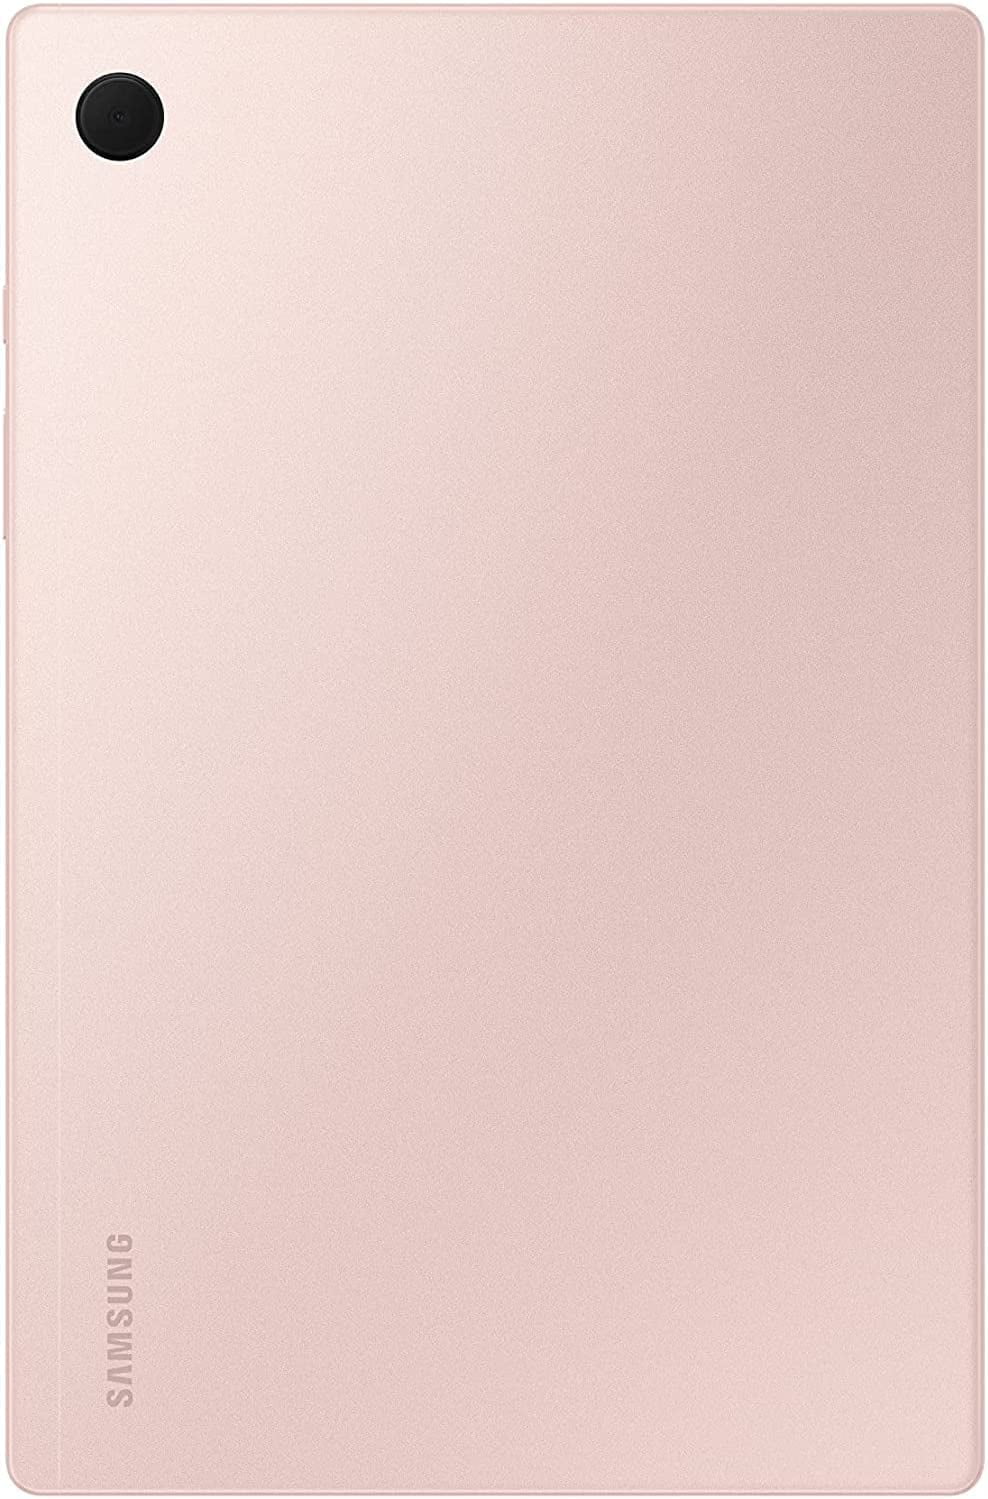 Samsung Galaxy Tab A8 LTE Android Tablet WiFi LTE, 10.5'' LCD Screen, 32GB  Storage, Long-Lasting Battery, Samsung Kids Content, Smart Switch, Expandable  Memory (Pink Gold)